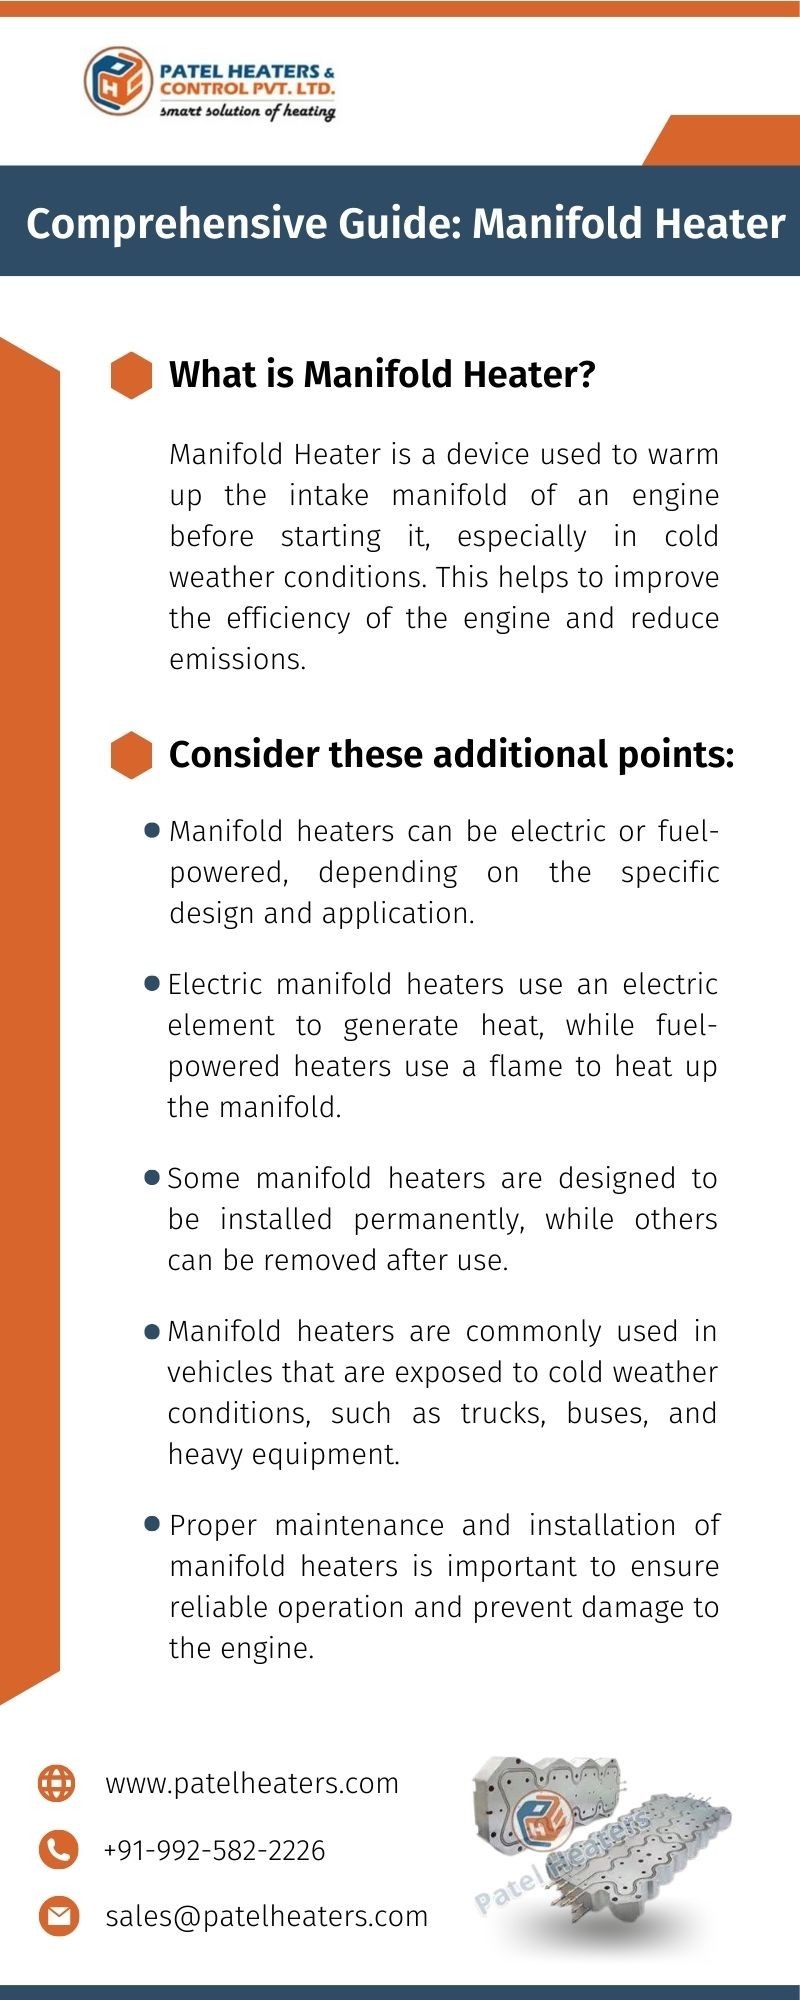 Get to Know the Key Features of Manifold Heaters!